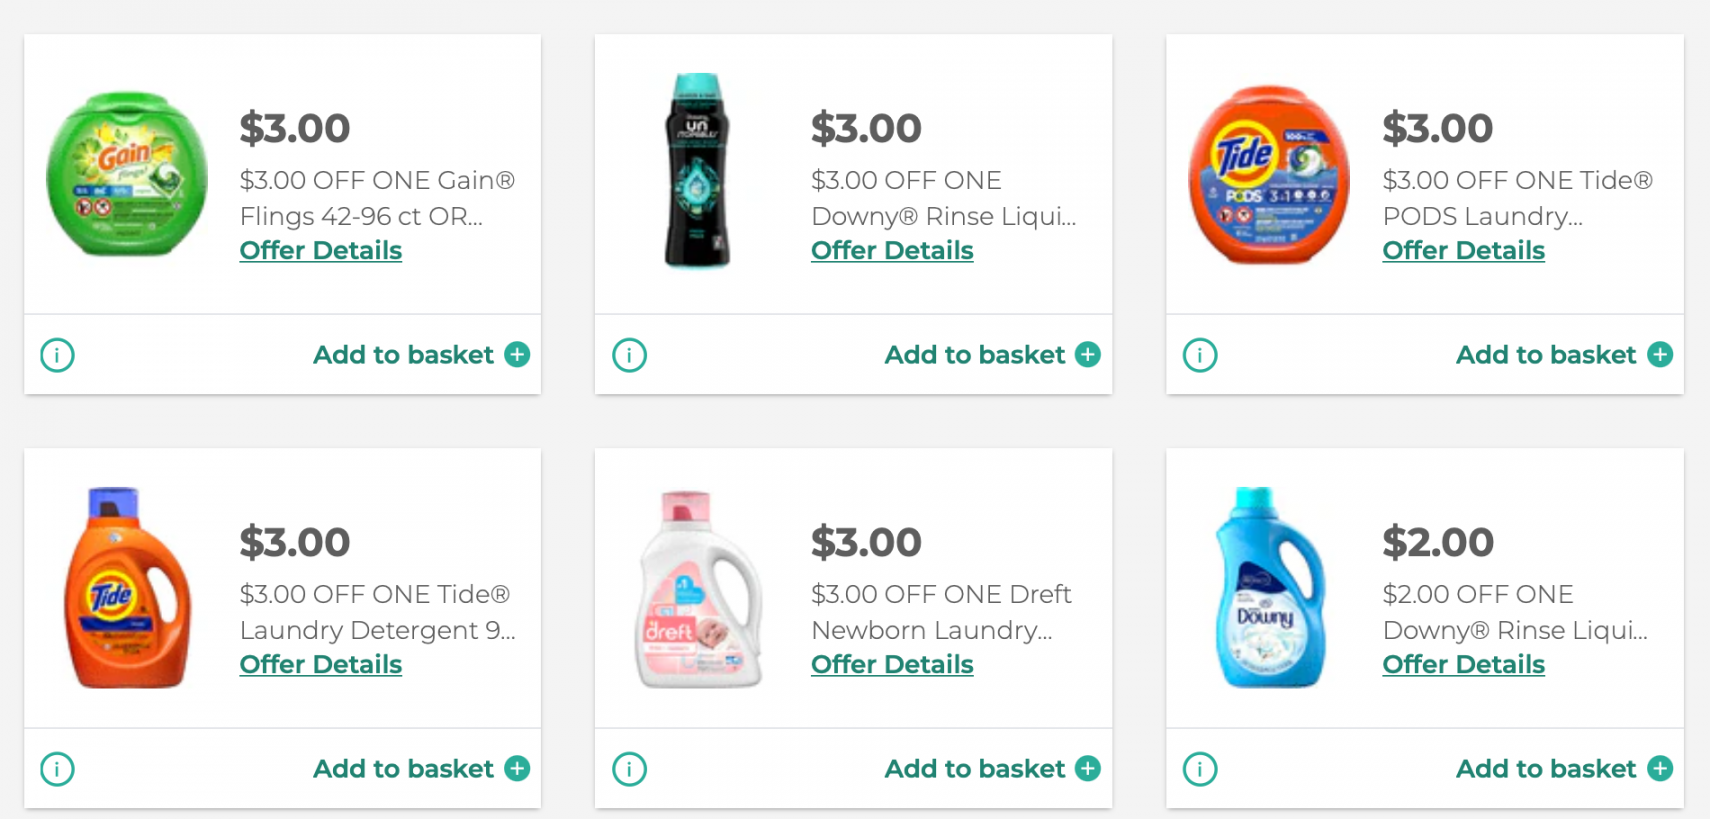 HIGH Value Printable P&G Coupons  How to Shop For Free with Kathy